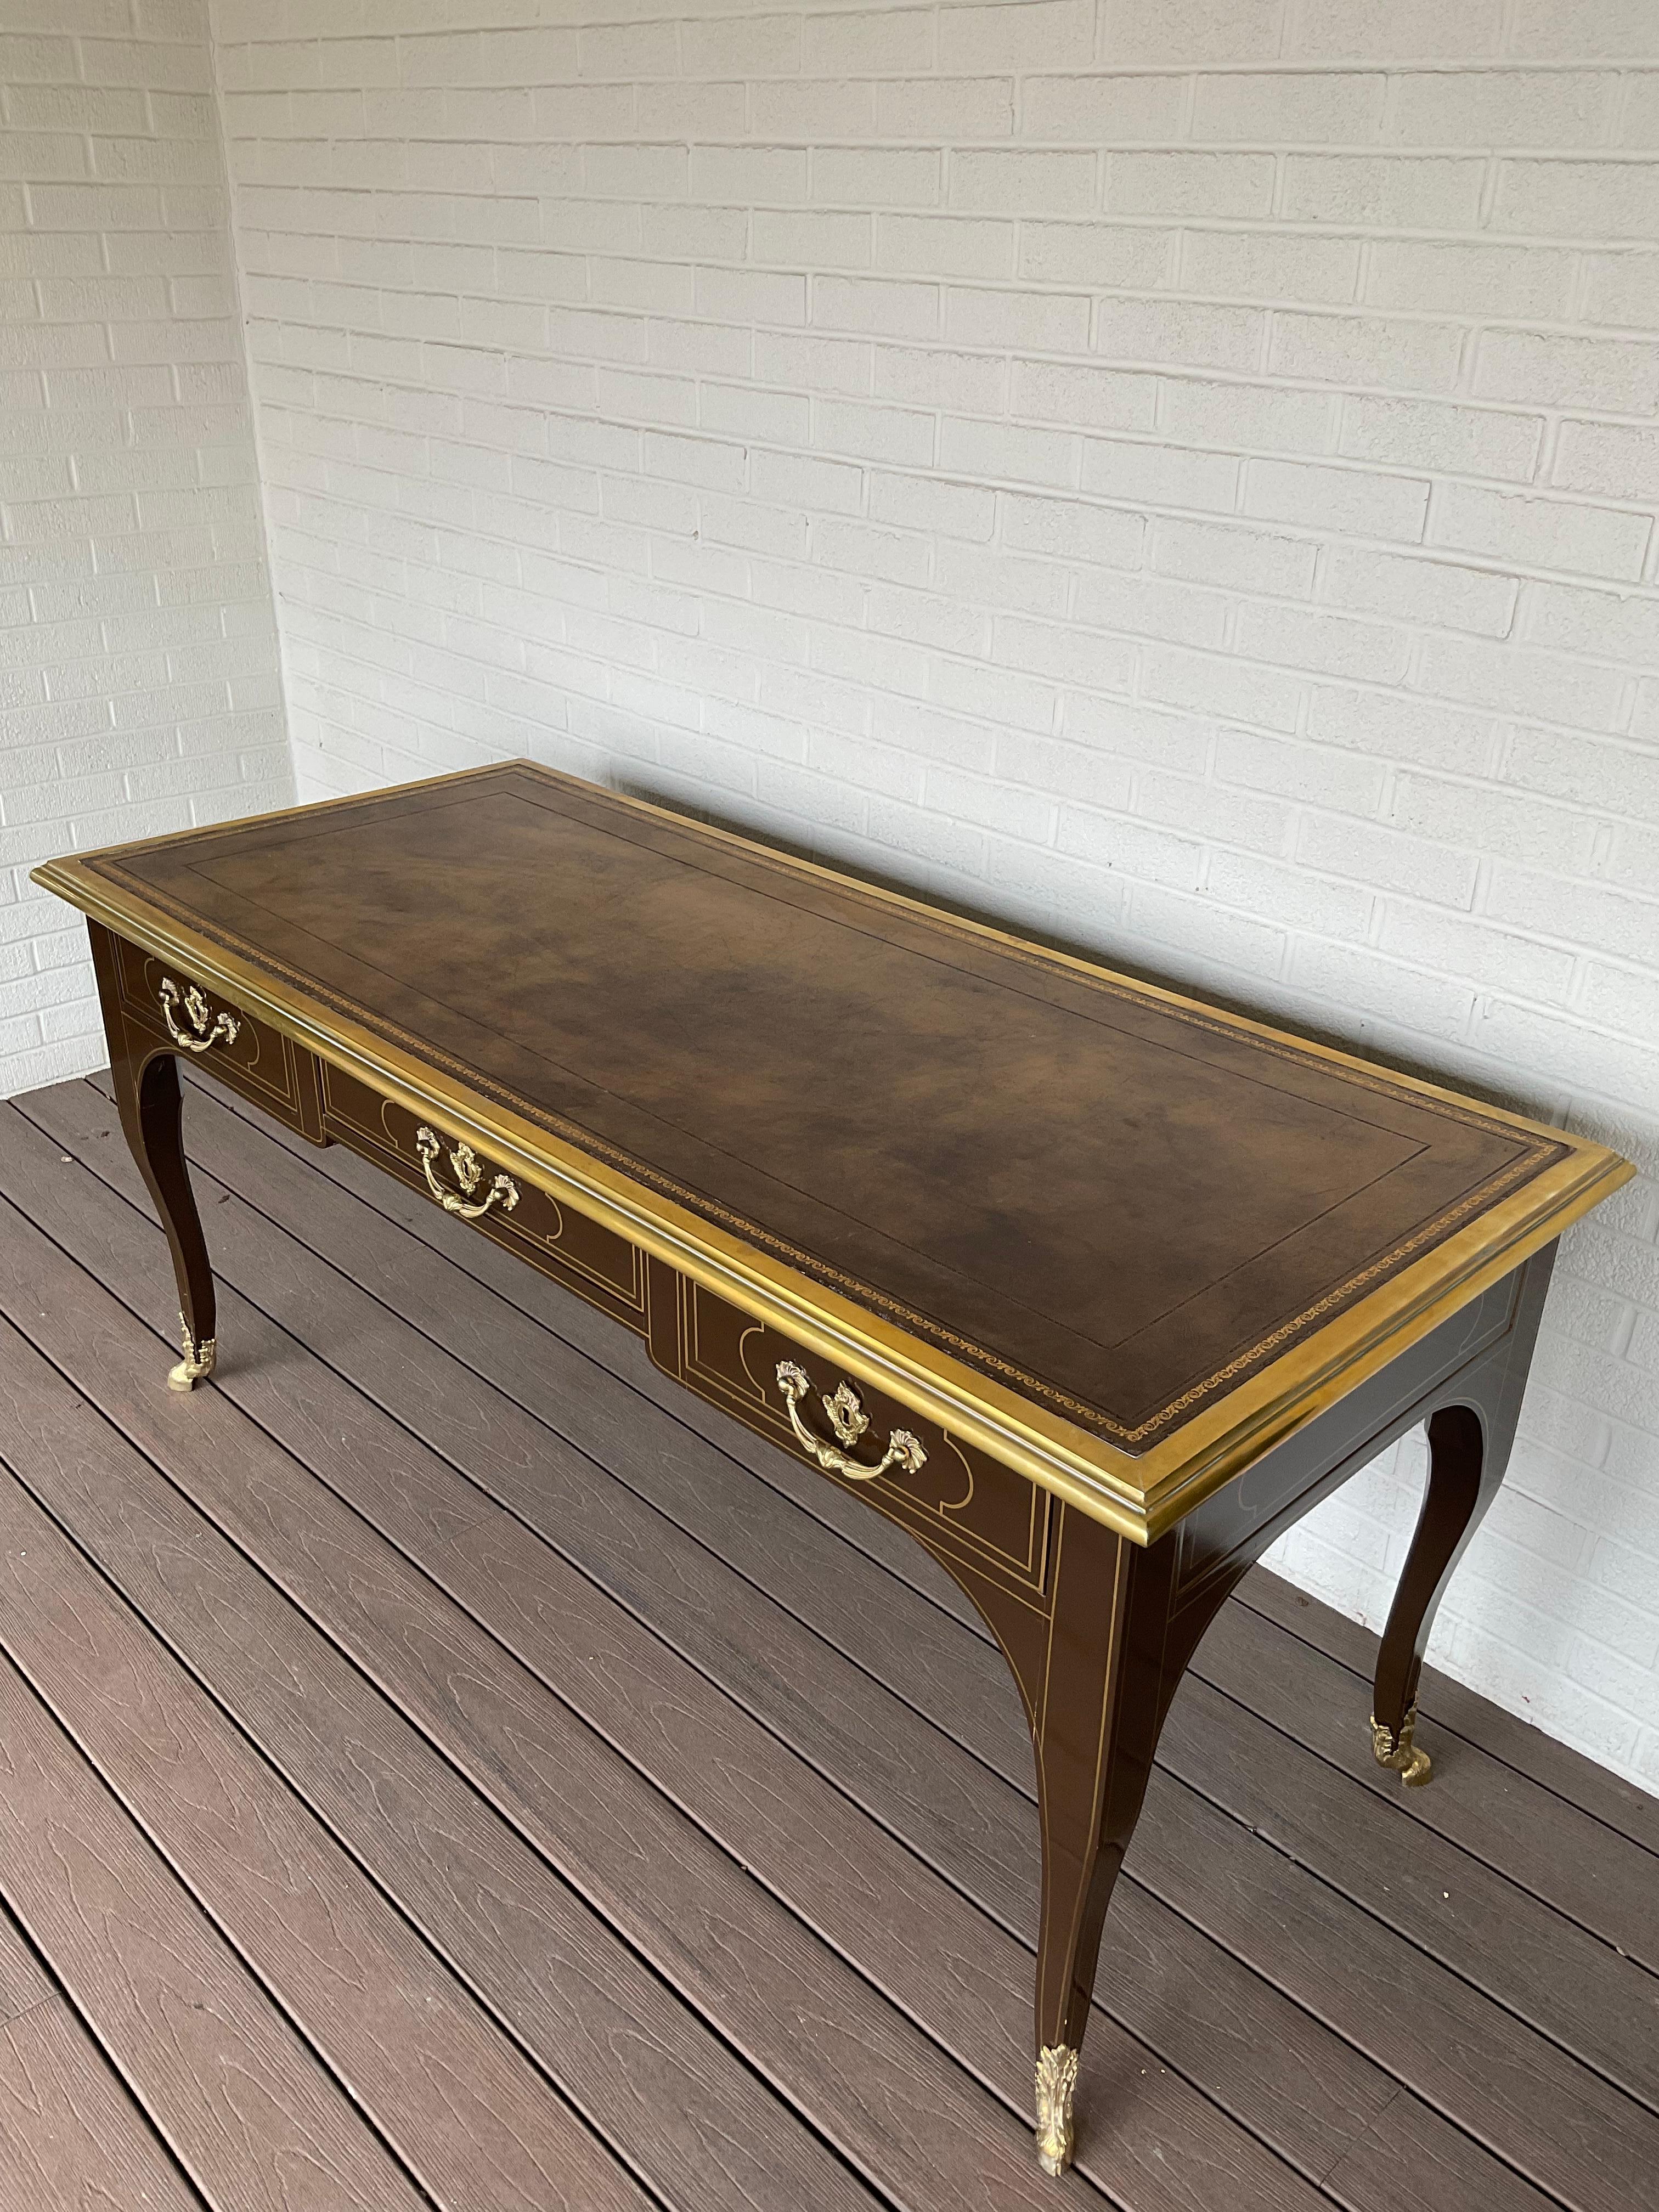 Brilliantly collaborative effort from Baker Furniture and Baker owned Mastercraft. Extraordinary chocolate brown lacquered finish with hand painted striping detailing. Large heavy brass boarder surrounds a hand tooled leather top. Gorgeous brass